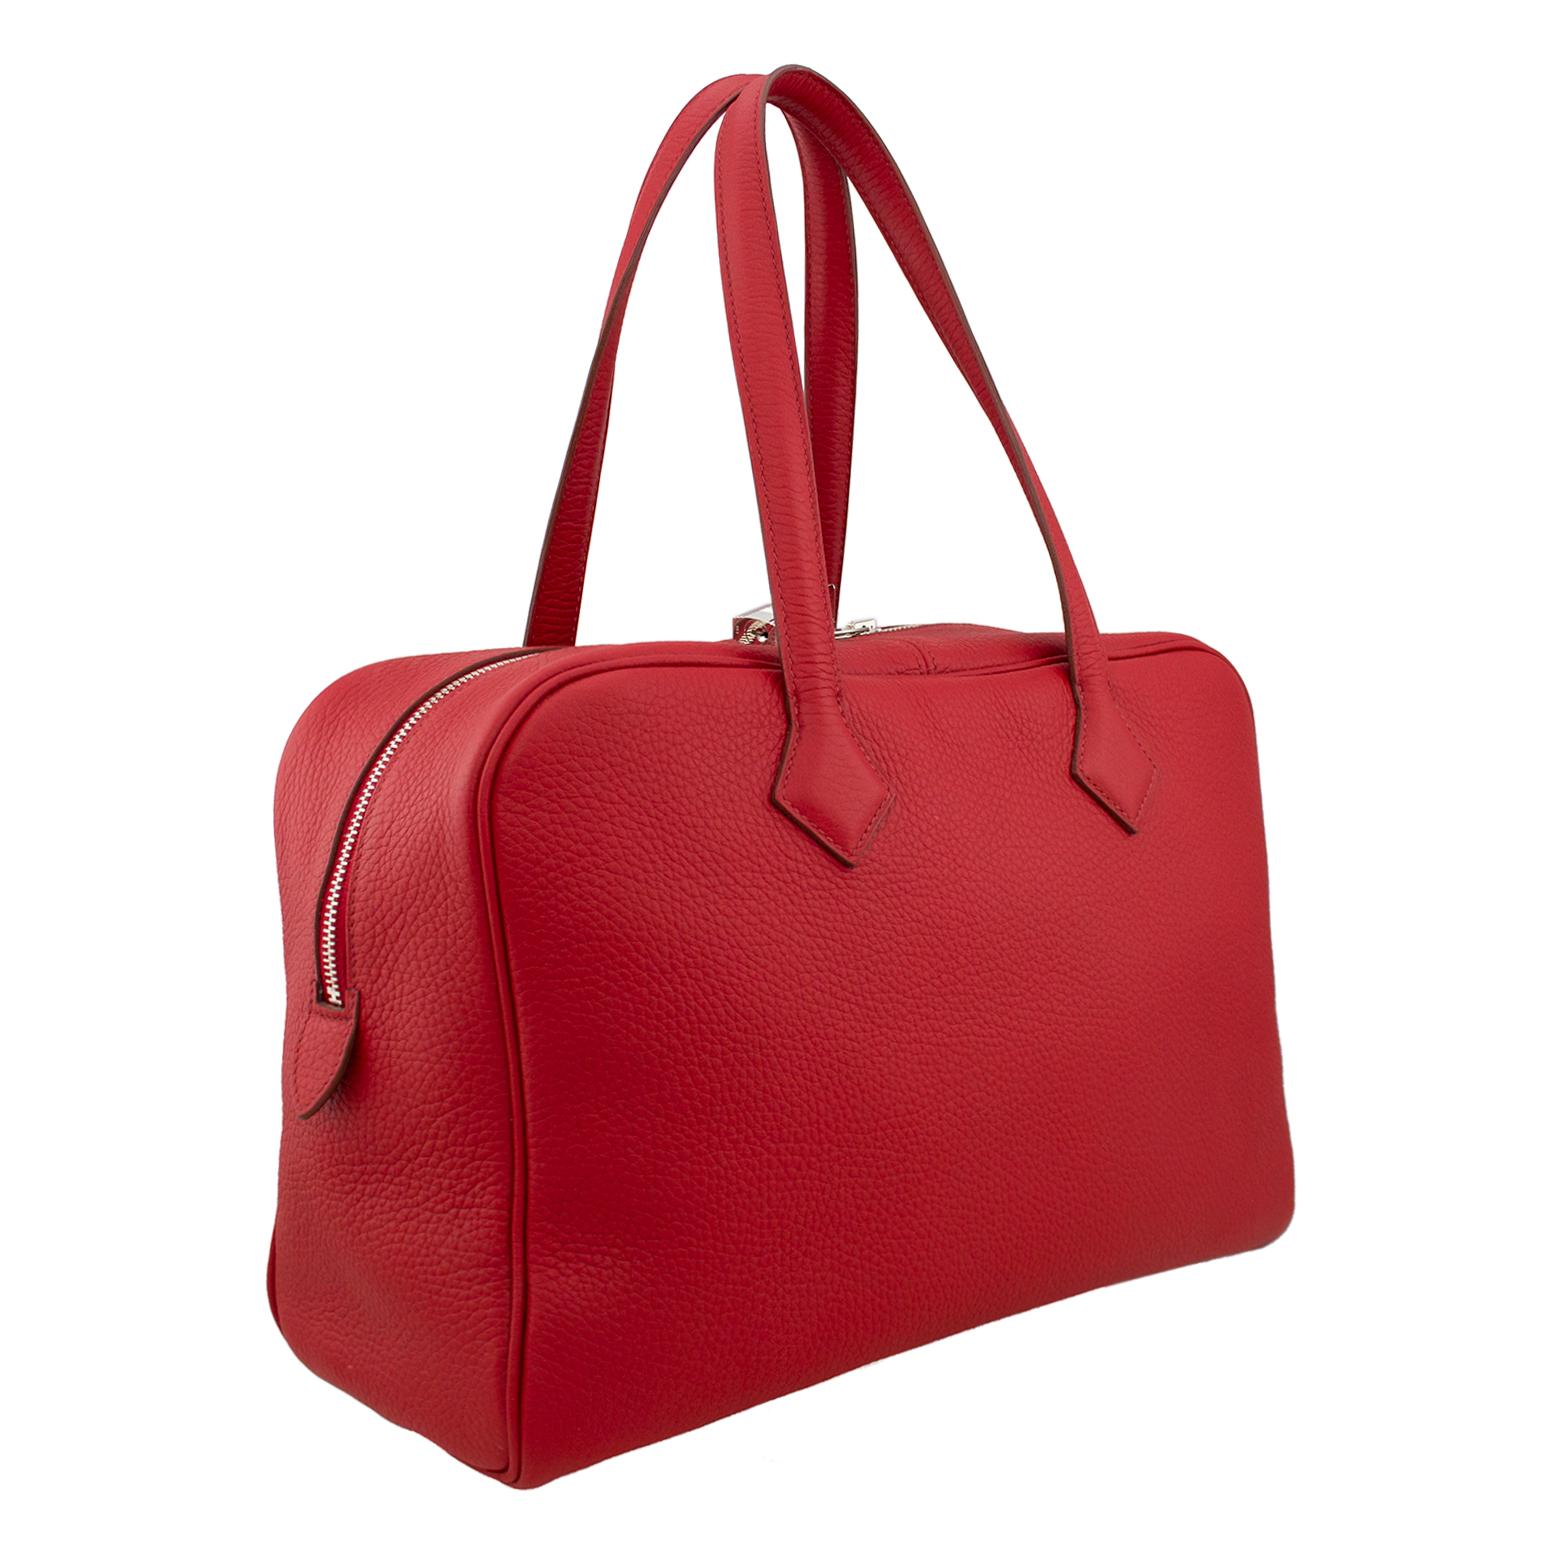 Authentic Hermes Taurillon Novillo Victoria II 35 in rouge garance. This stylish tote is crafted of fine Taurillon Novillo leather in red. It features very tall leather strap handles, a double palladium zipper with lock and opens to a beige